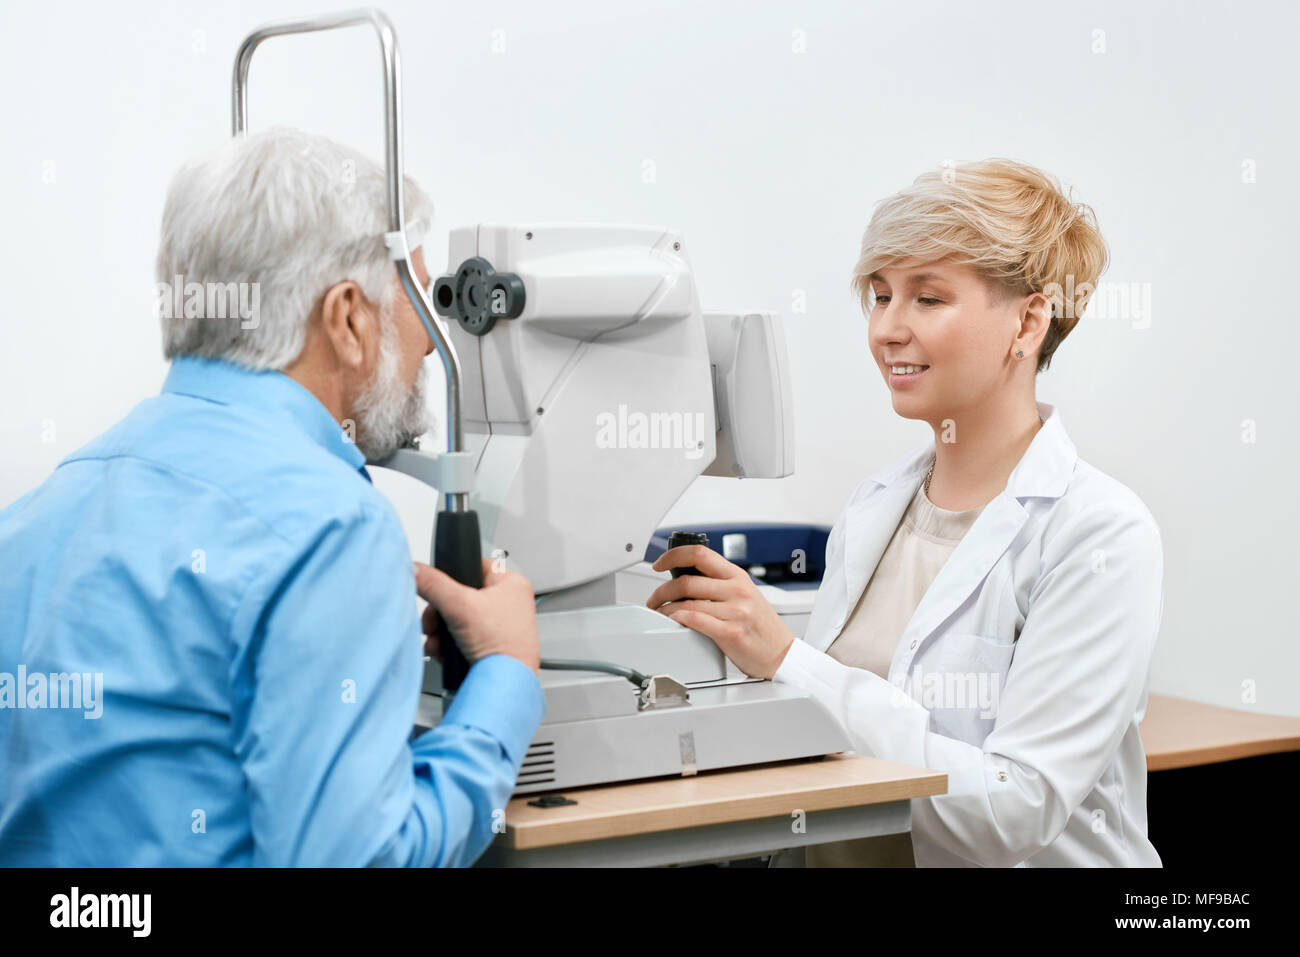 Expirienced ophtalmological specialist treating old patient's vision. Doctor is working with medical equipment, looking skilled and professional. Oculist is working in white laboratory. Stock Photo